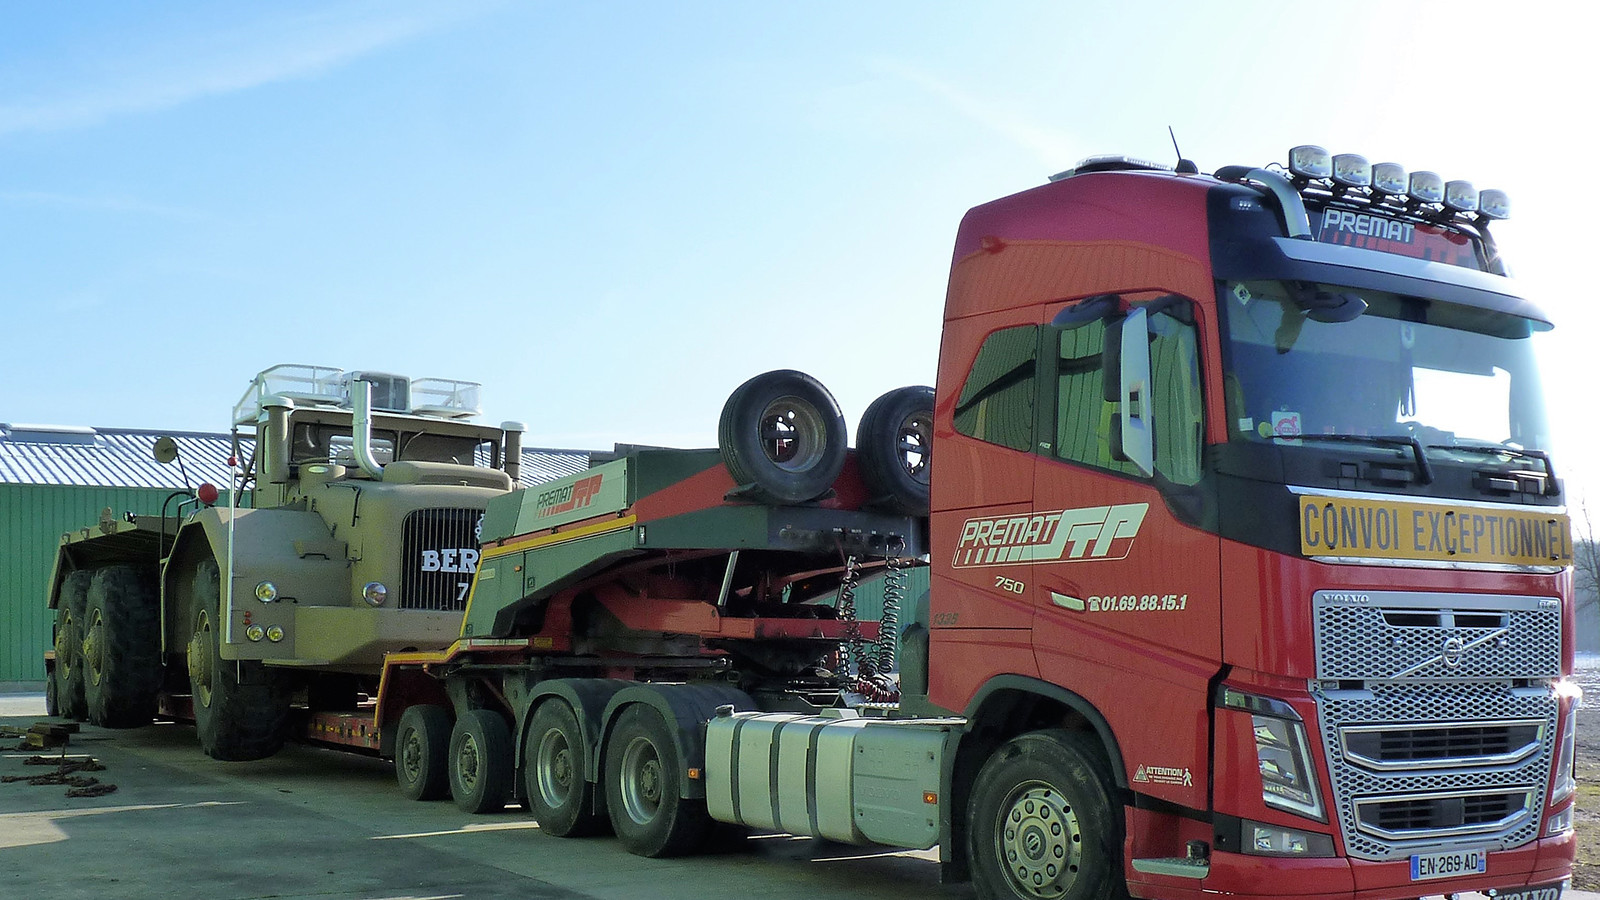 It was the world’s largest truck – and it’s back on the road!